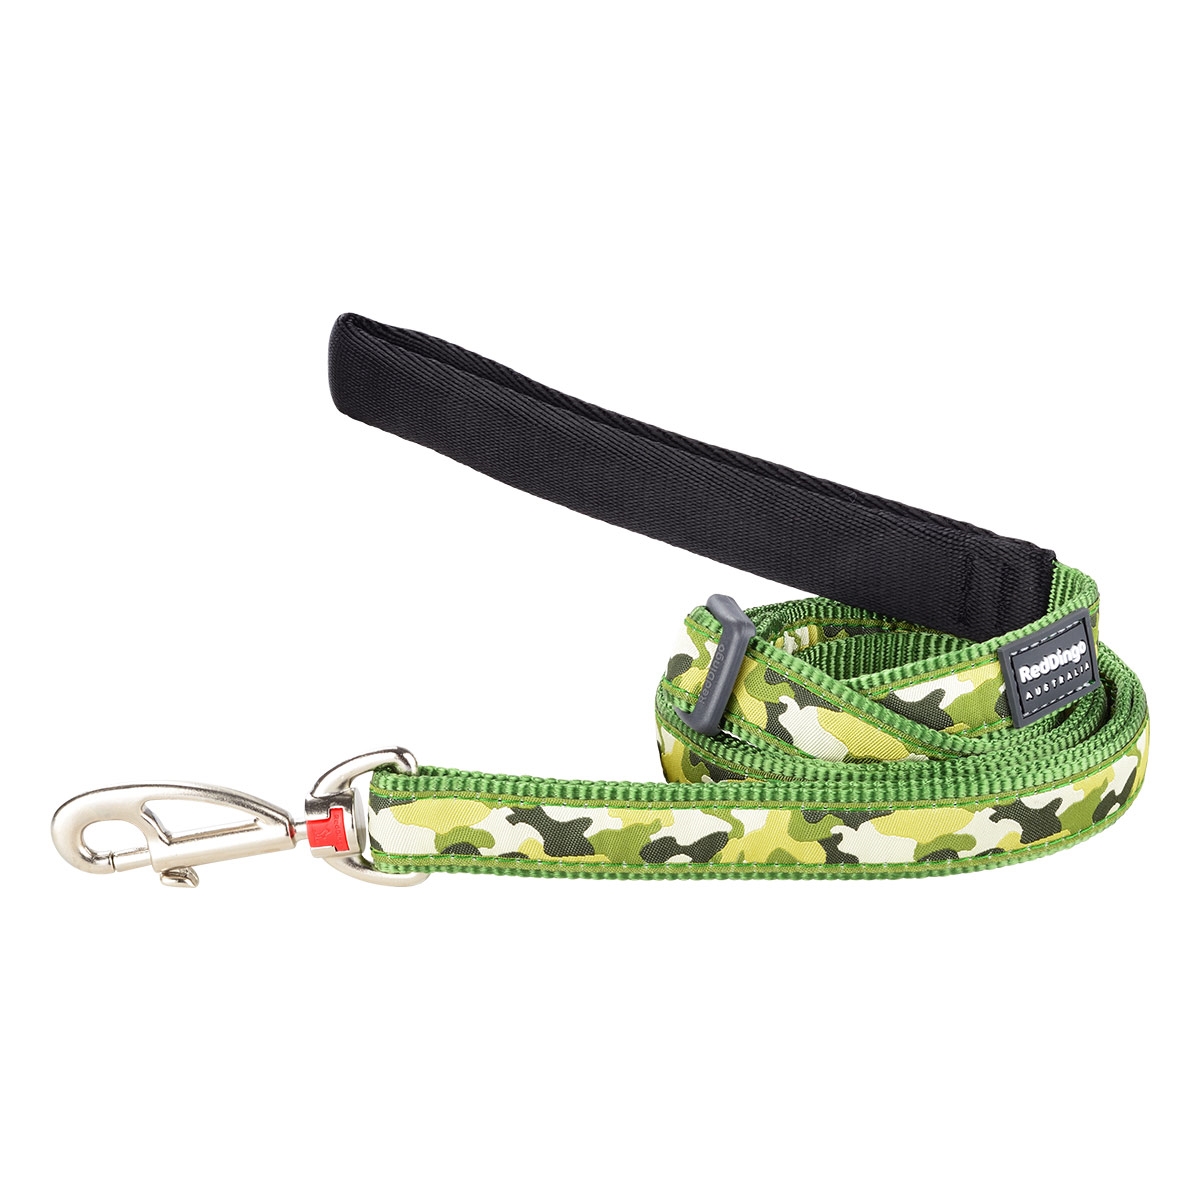 Picture of Red Dingo L6-CF-GR-20 Dog Lead Design Camouflage Green - Medium  6ft